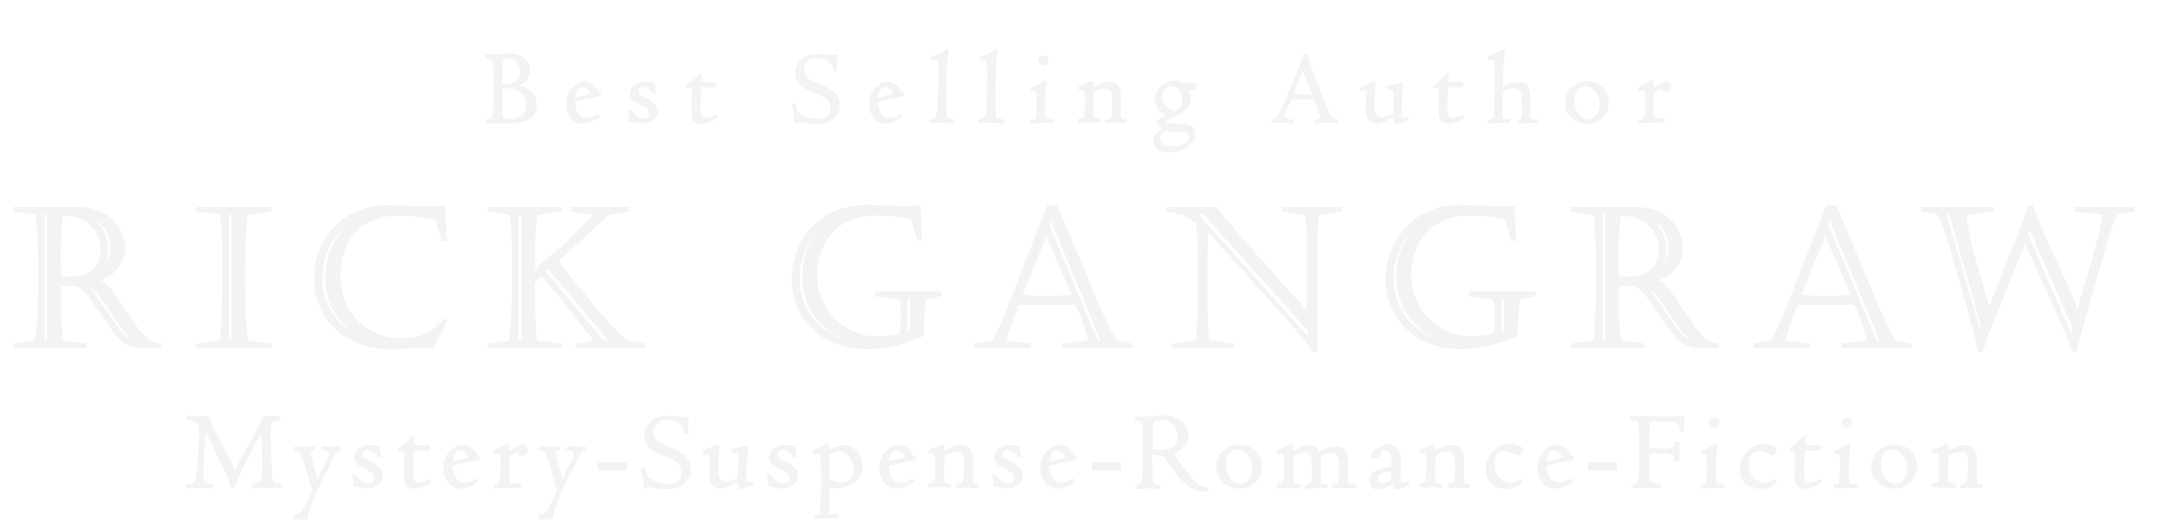 Best Selling Author Rick Gangraw